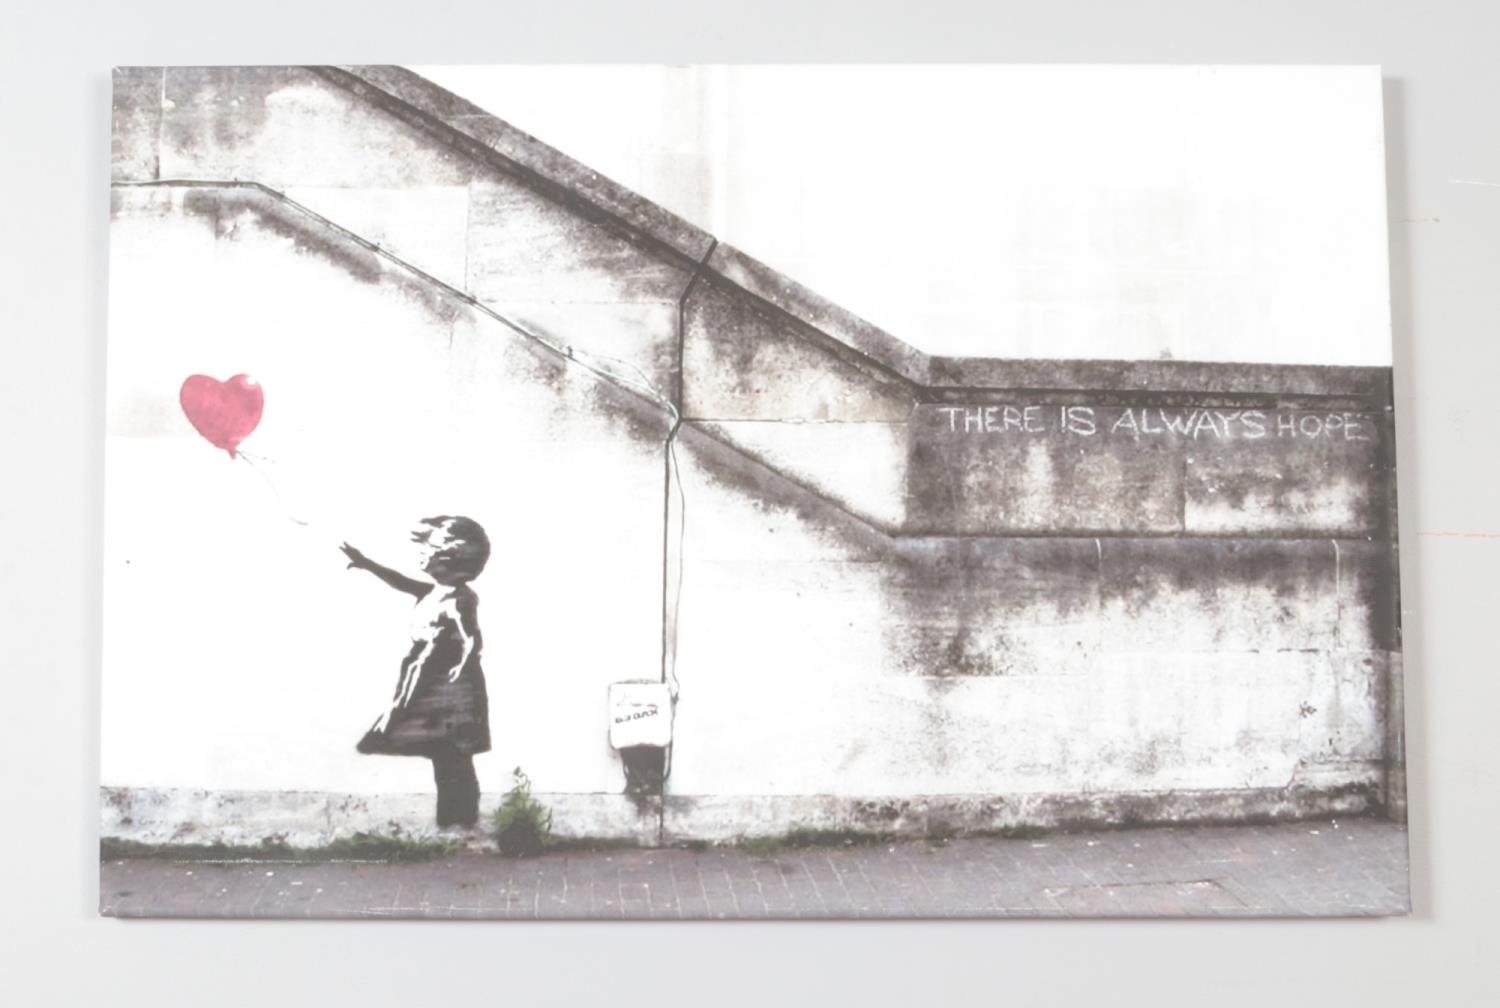 After Banksy, a framed print on canvas, Balloon Girl, There Is Always Hope. 51cm x 77cm. - Banksy